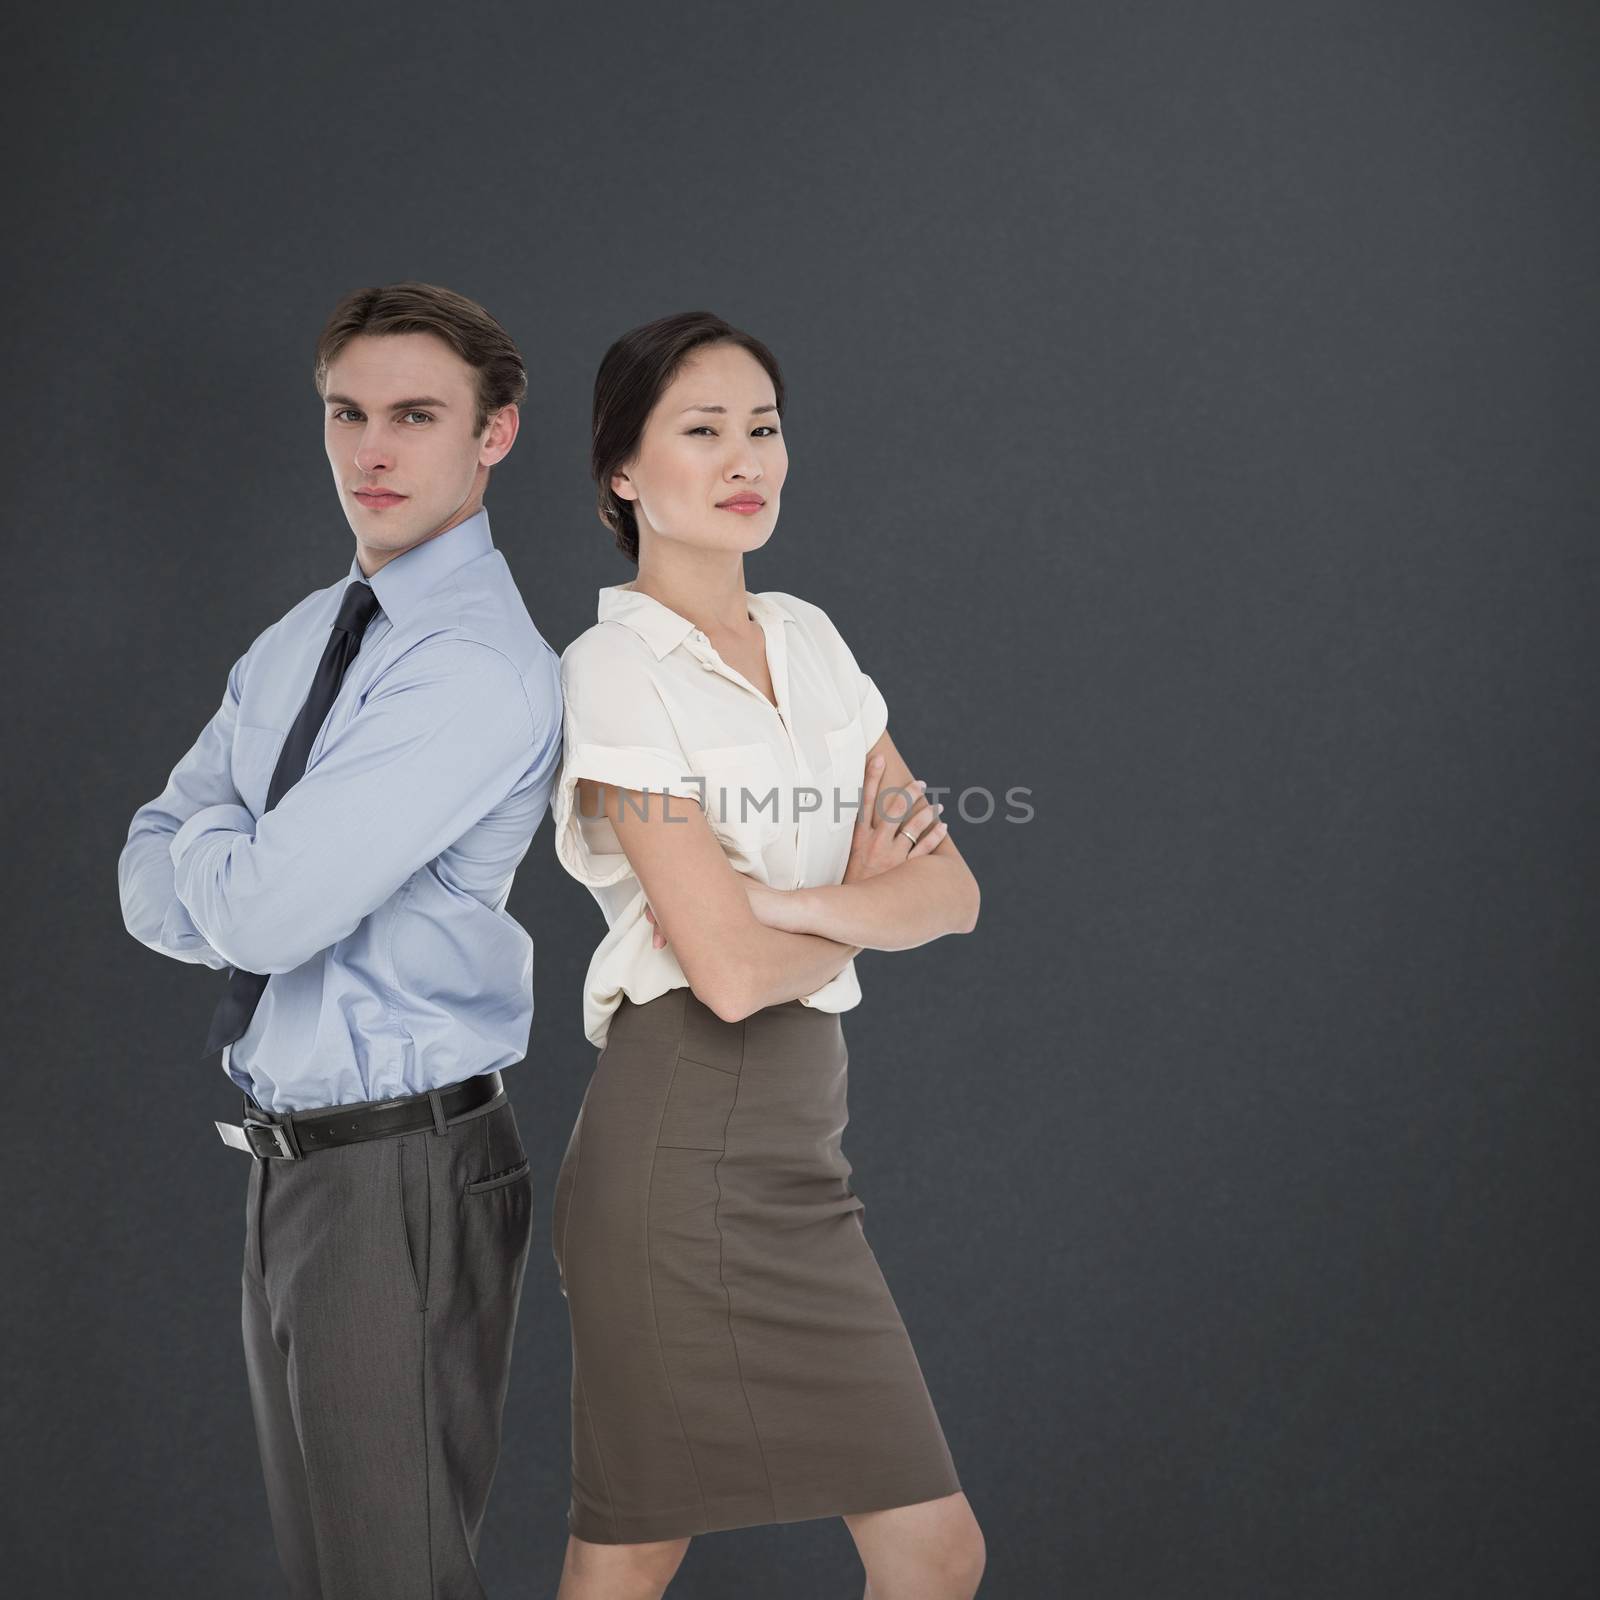 Business colleagues with arms crossed in office against grey background